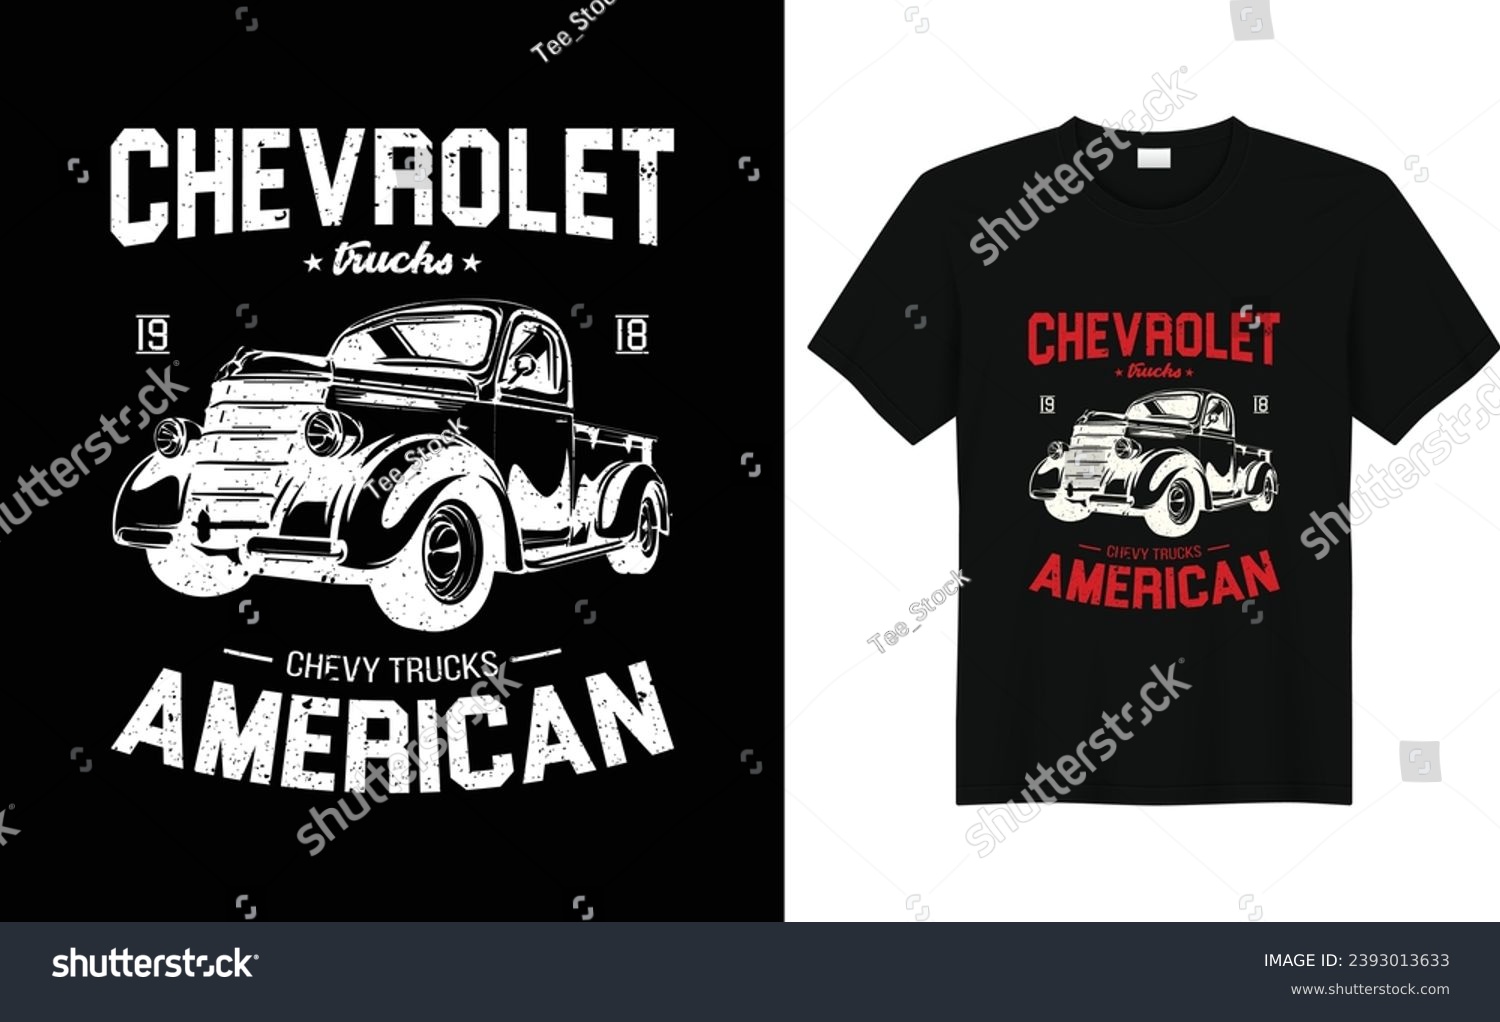 SVG of Chevrolet Trucks 1918 Chevy Trucks American American classic Vintage Style with truck T-Shirt Design svg